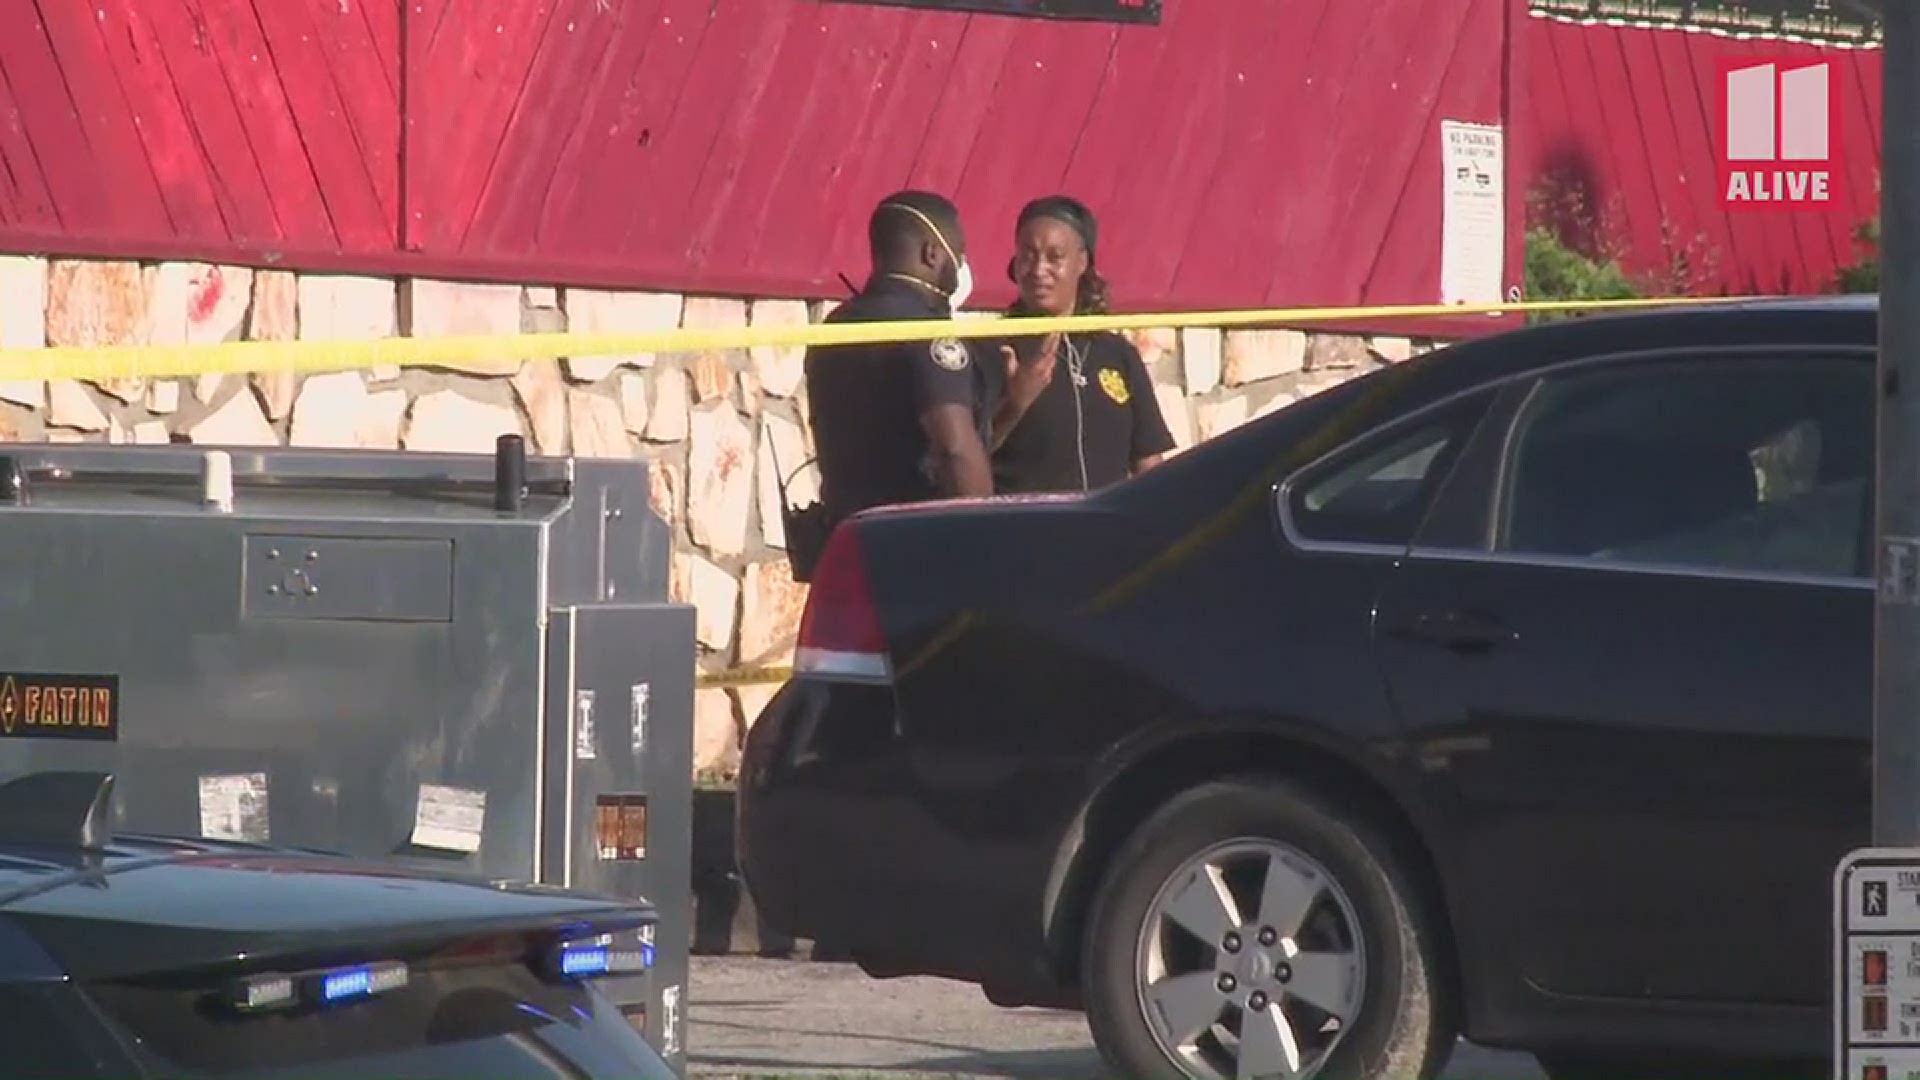 Atlanta Police officers were investigating a reported shooting outside a nightclub on Campbellton Road on Sunday morning.